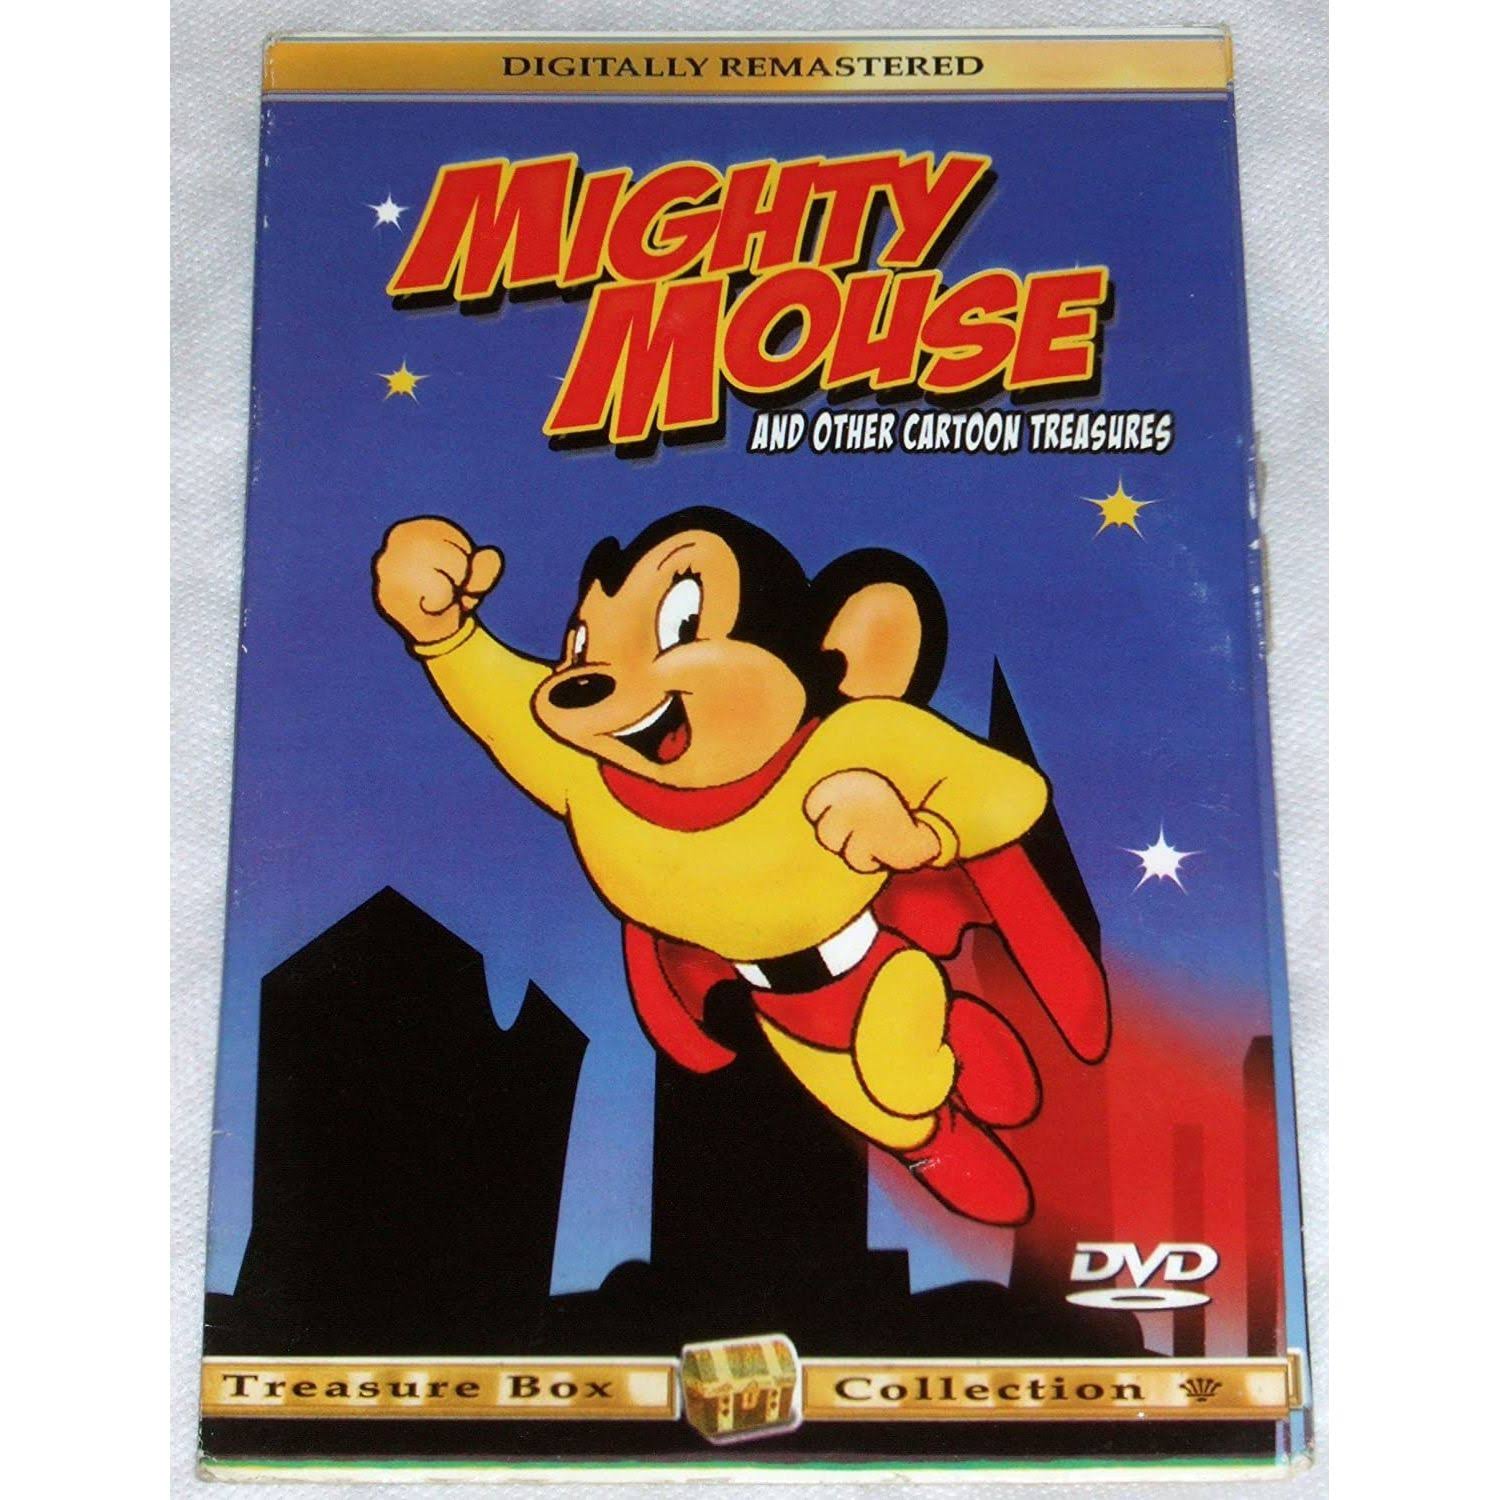 Mighty Mouse and Other Cartoon Treasures (dvd)